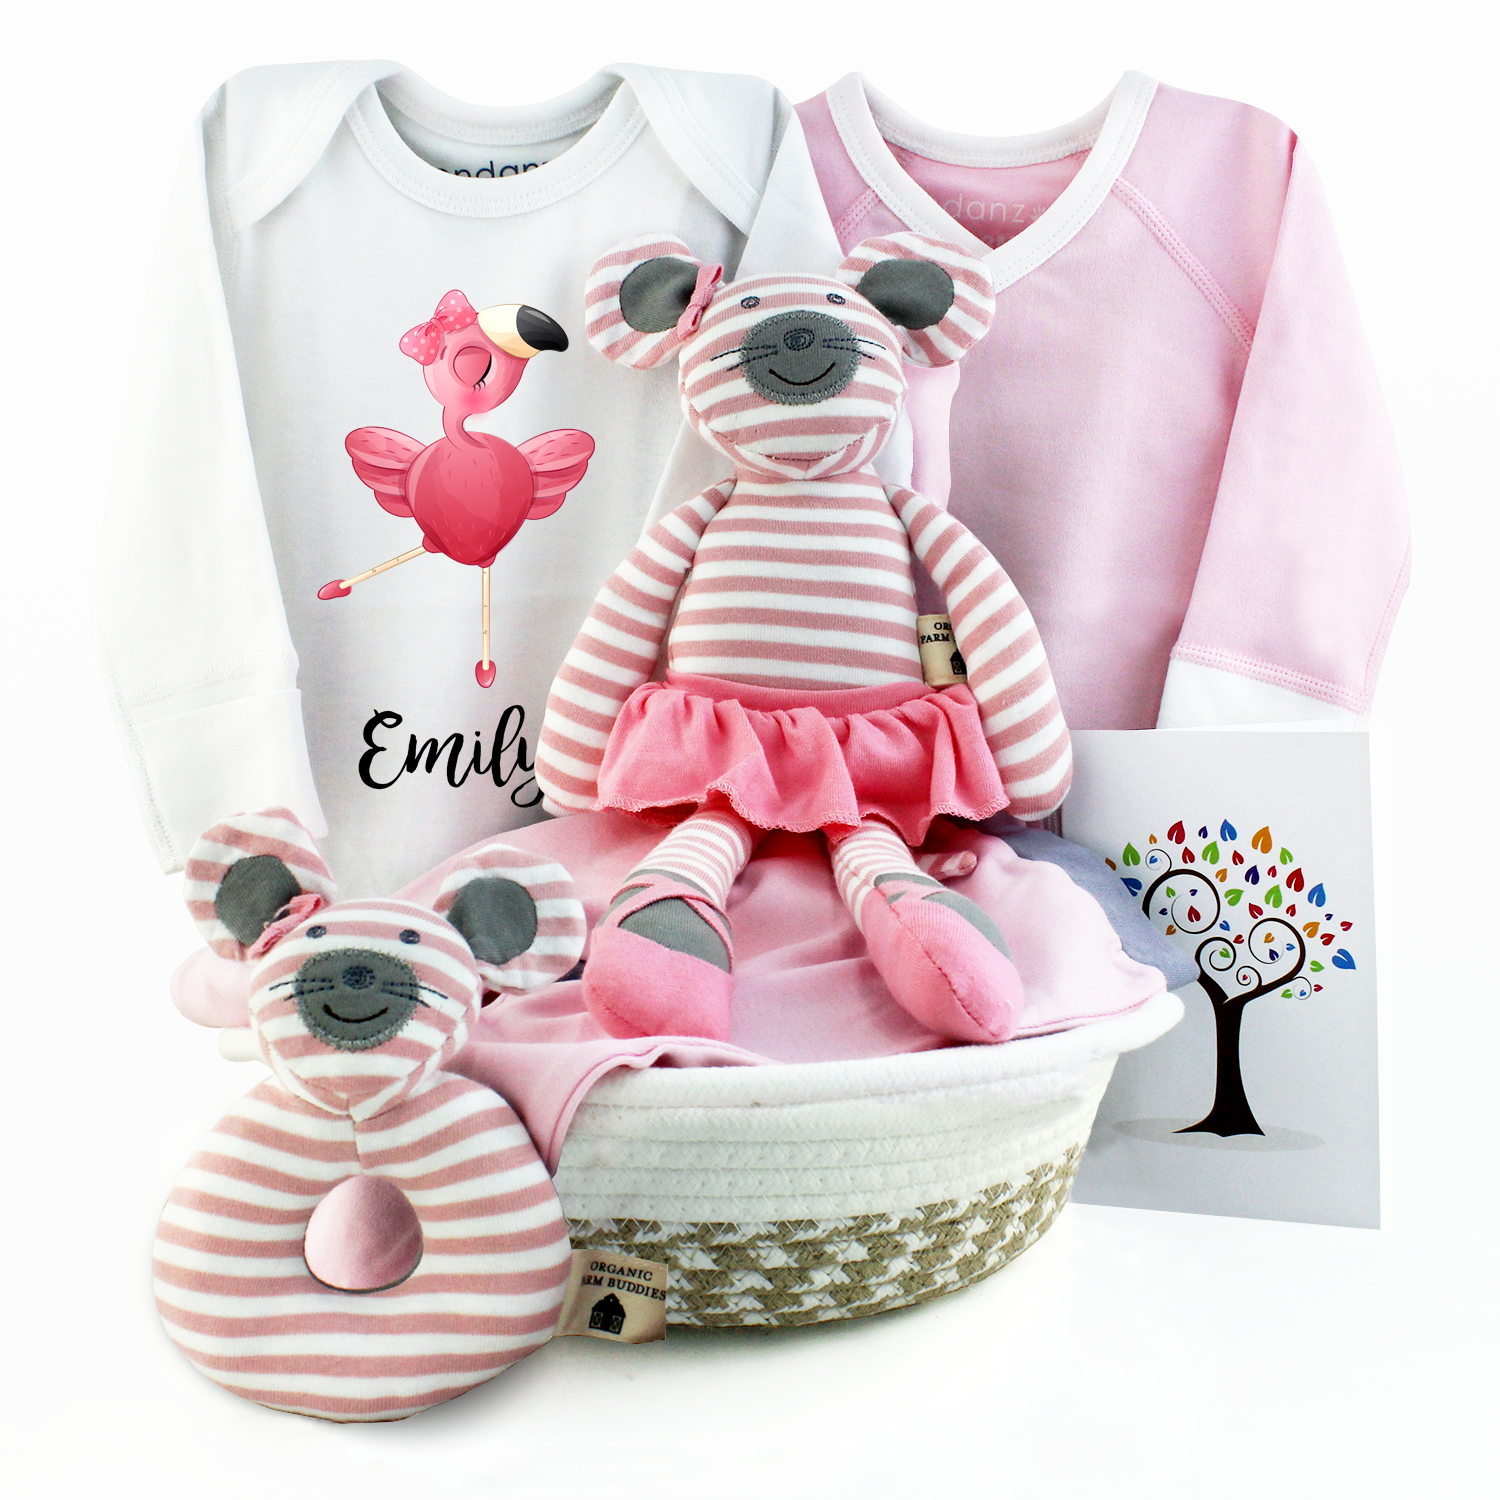 Send New Baby Gifts to India, Baby Set & Hampers, Free Ship